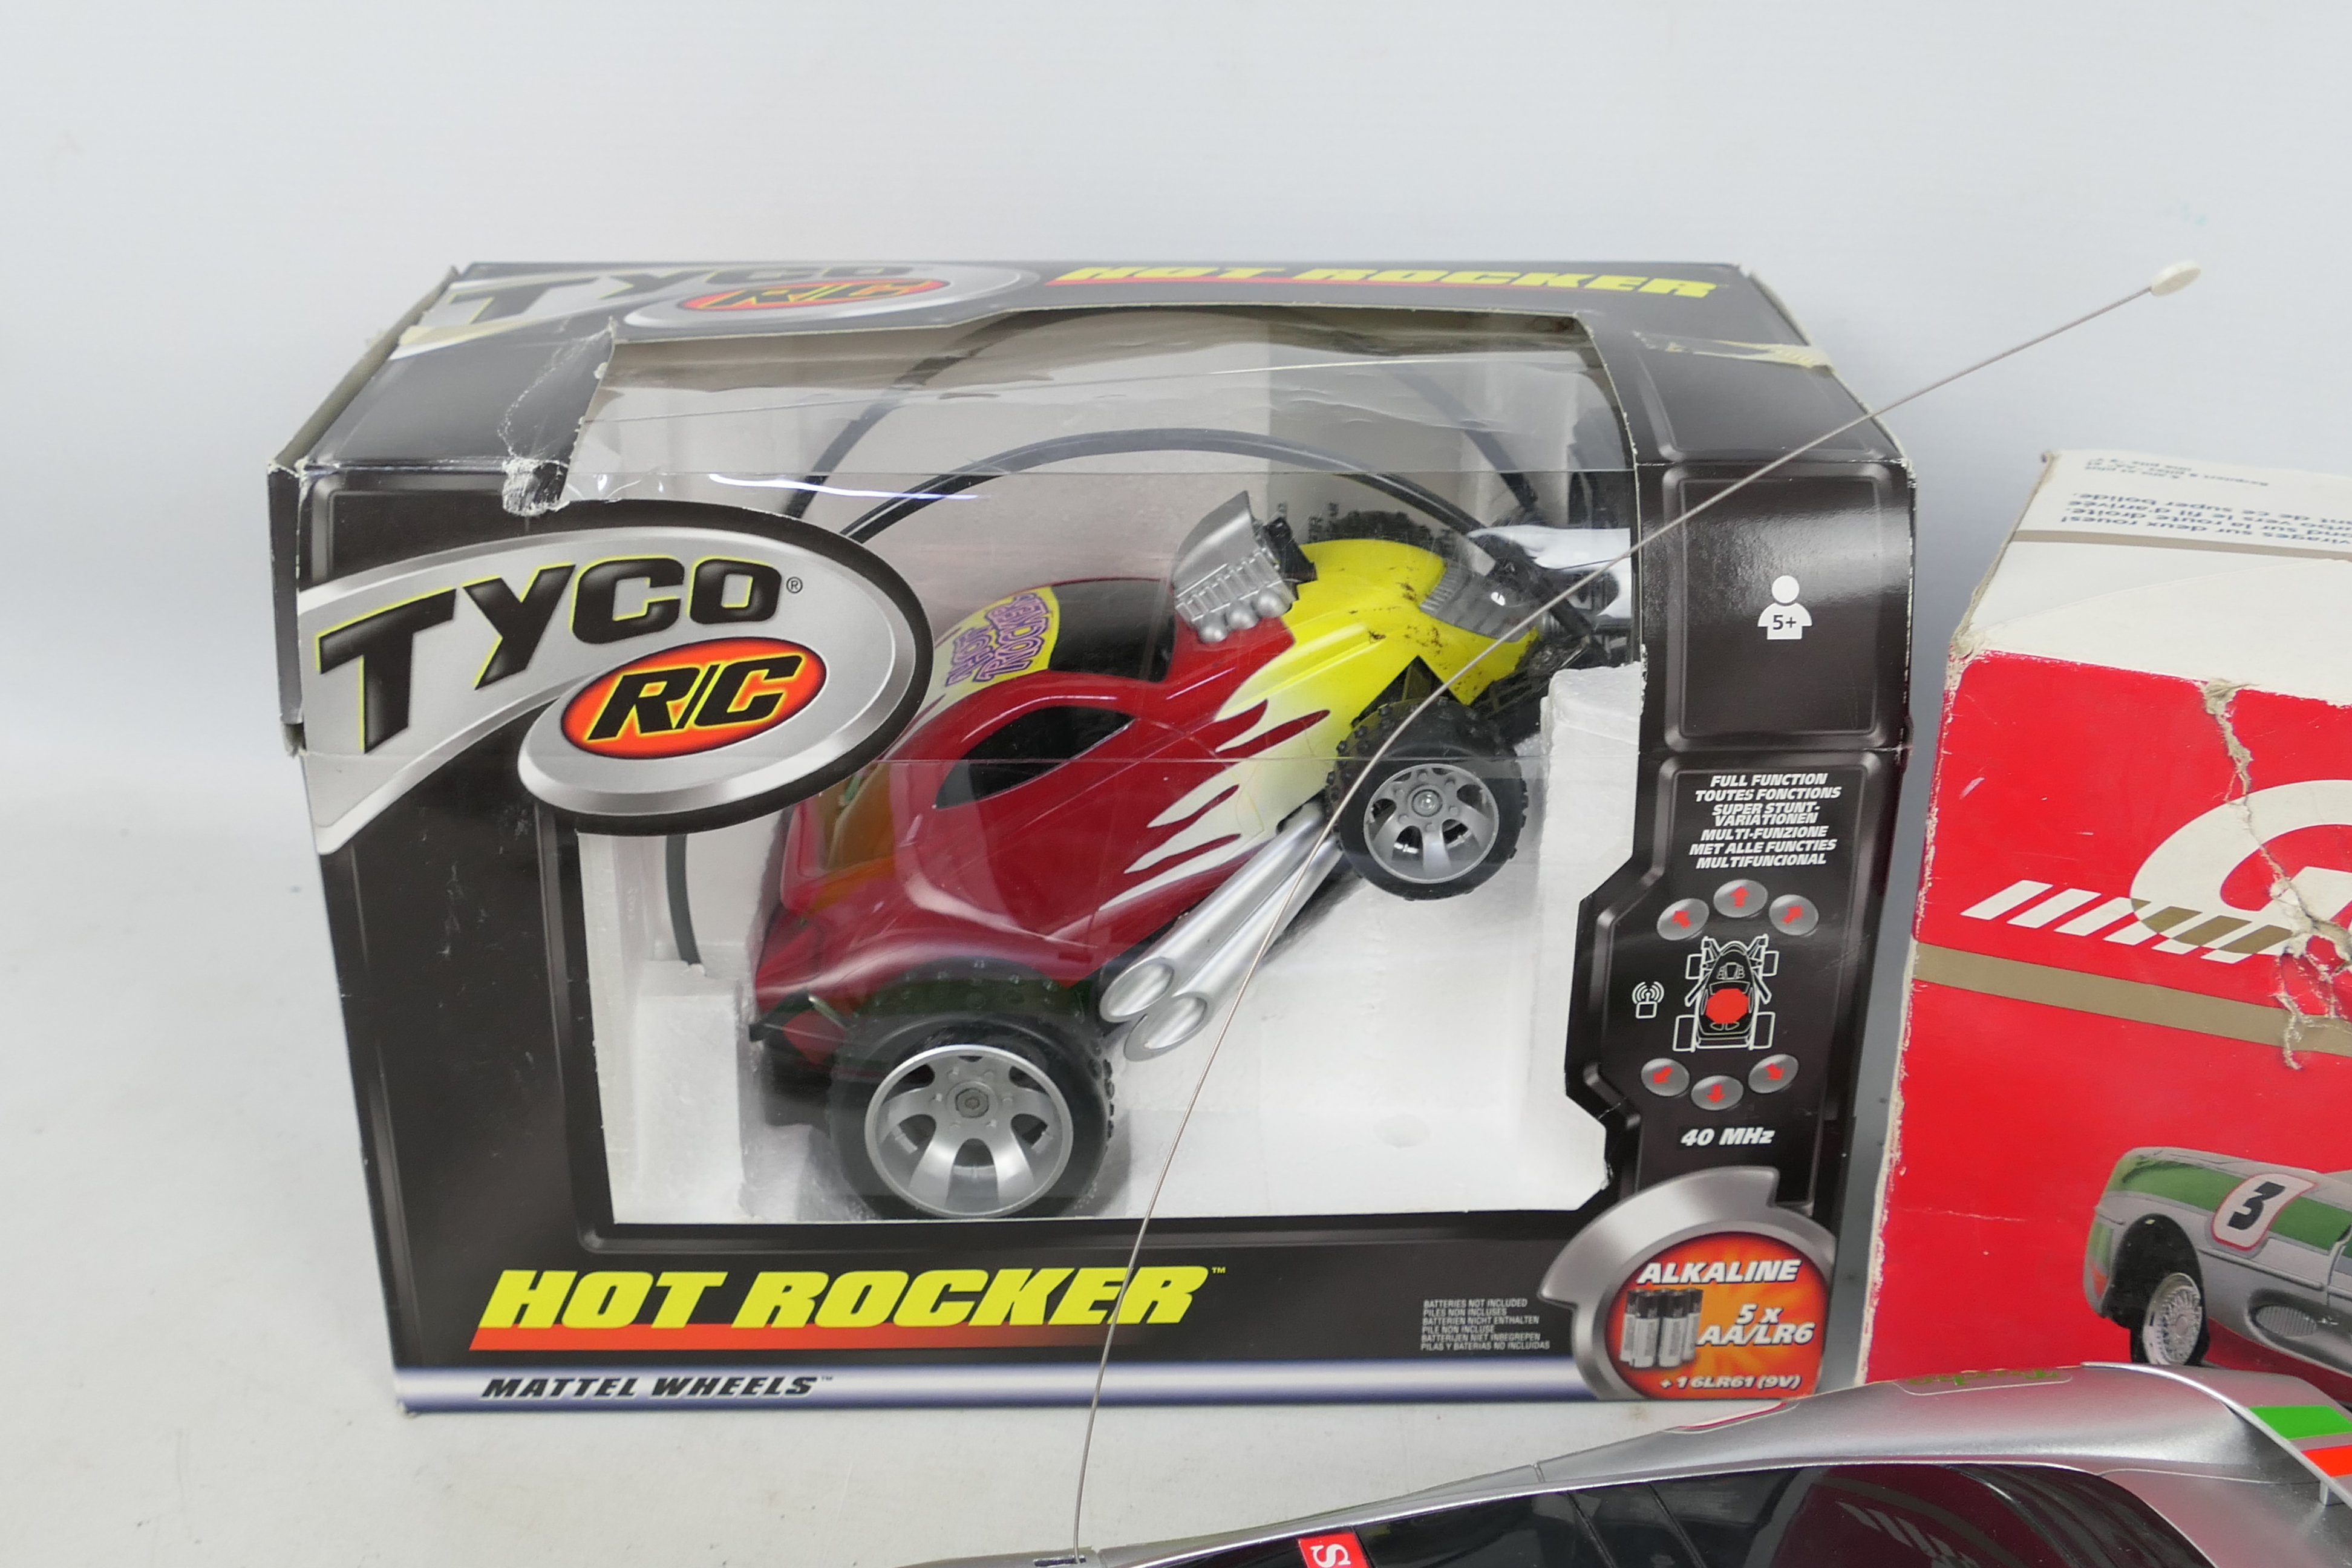 Tyco - Go - 2 x boxed radio control models, a Jaguar XJ220 Silver Racer and a Hot Rocker stunt car. - Image 2 of 4